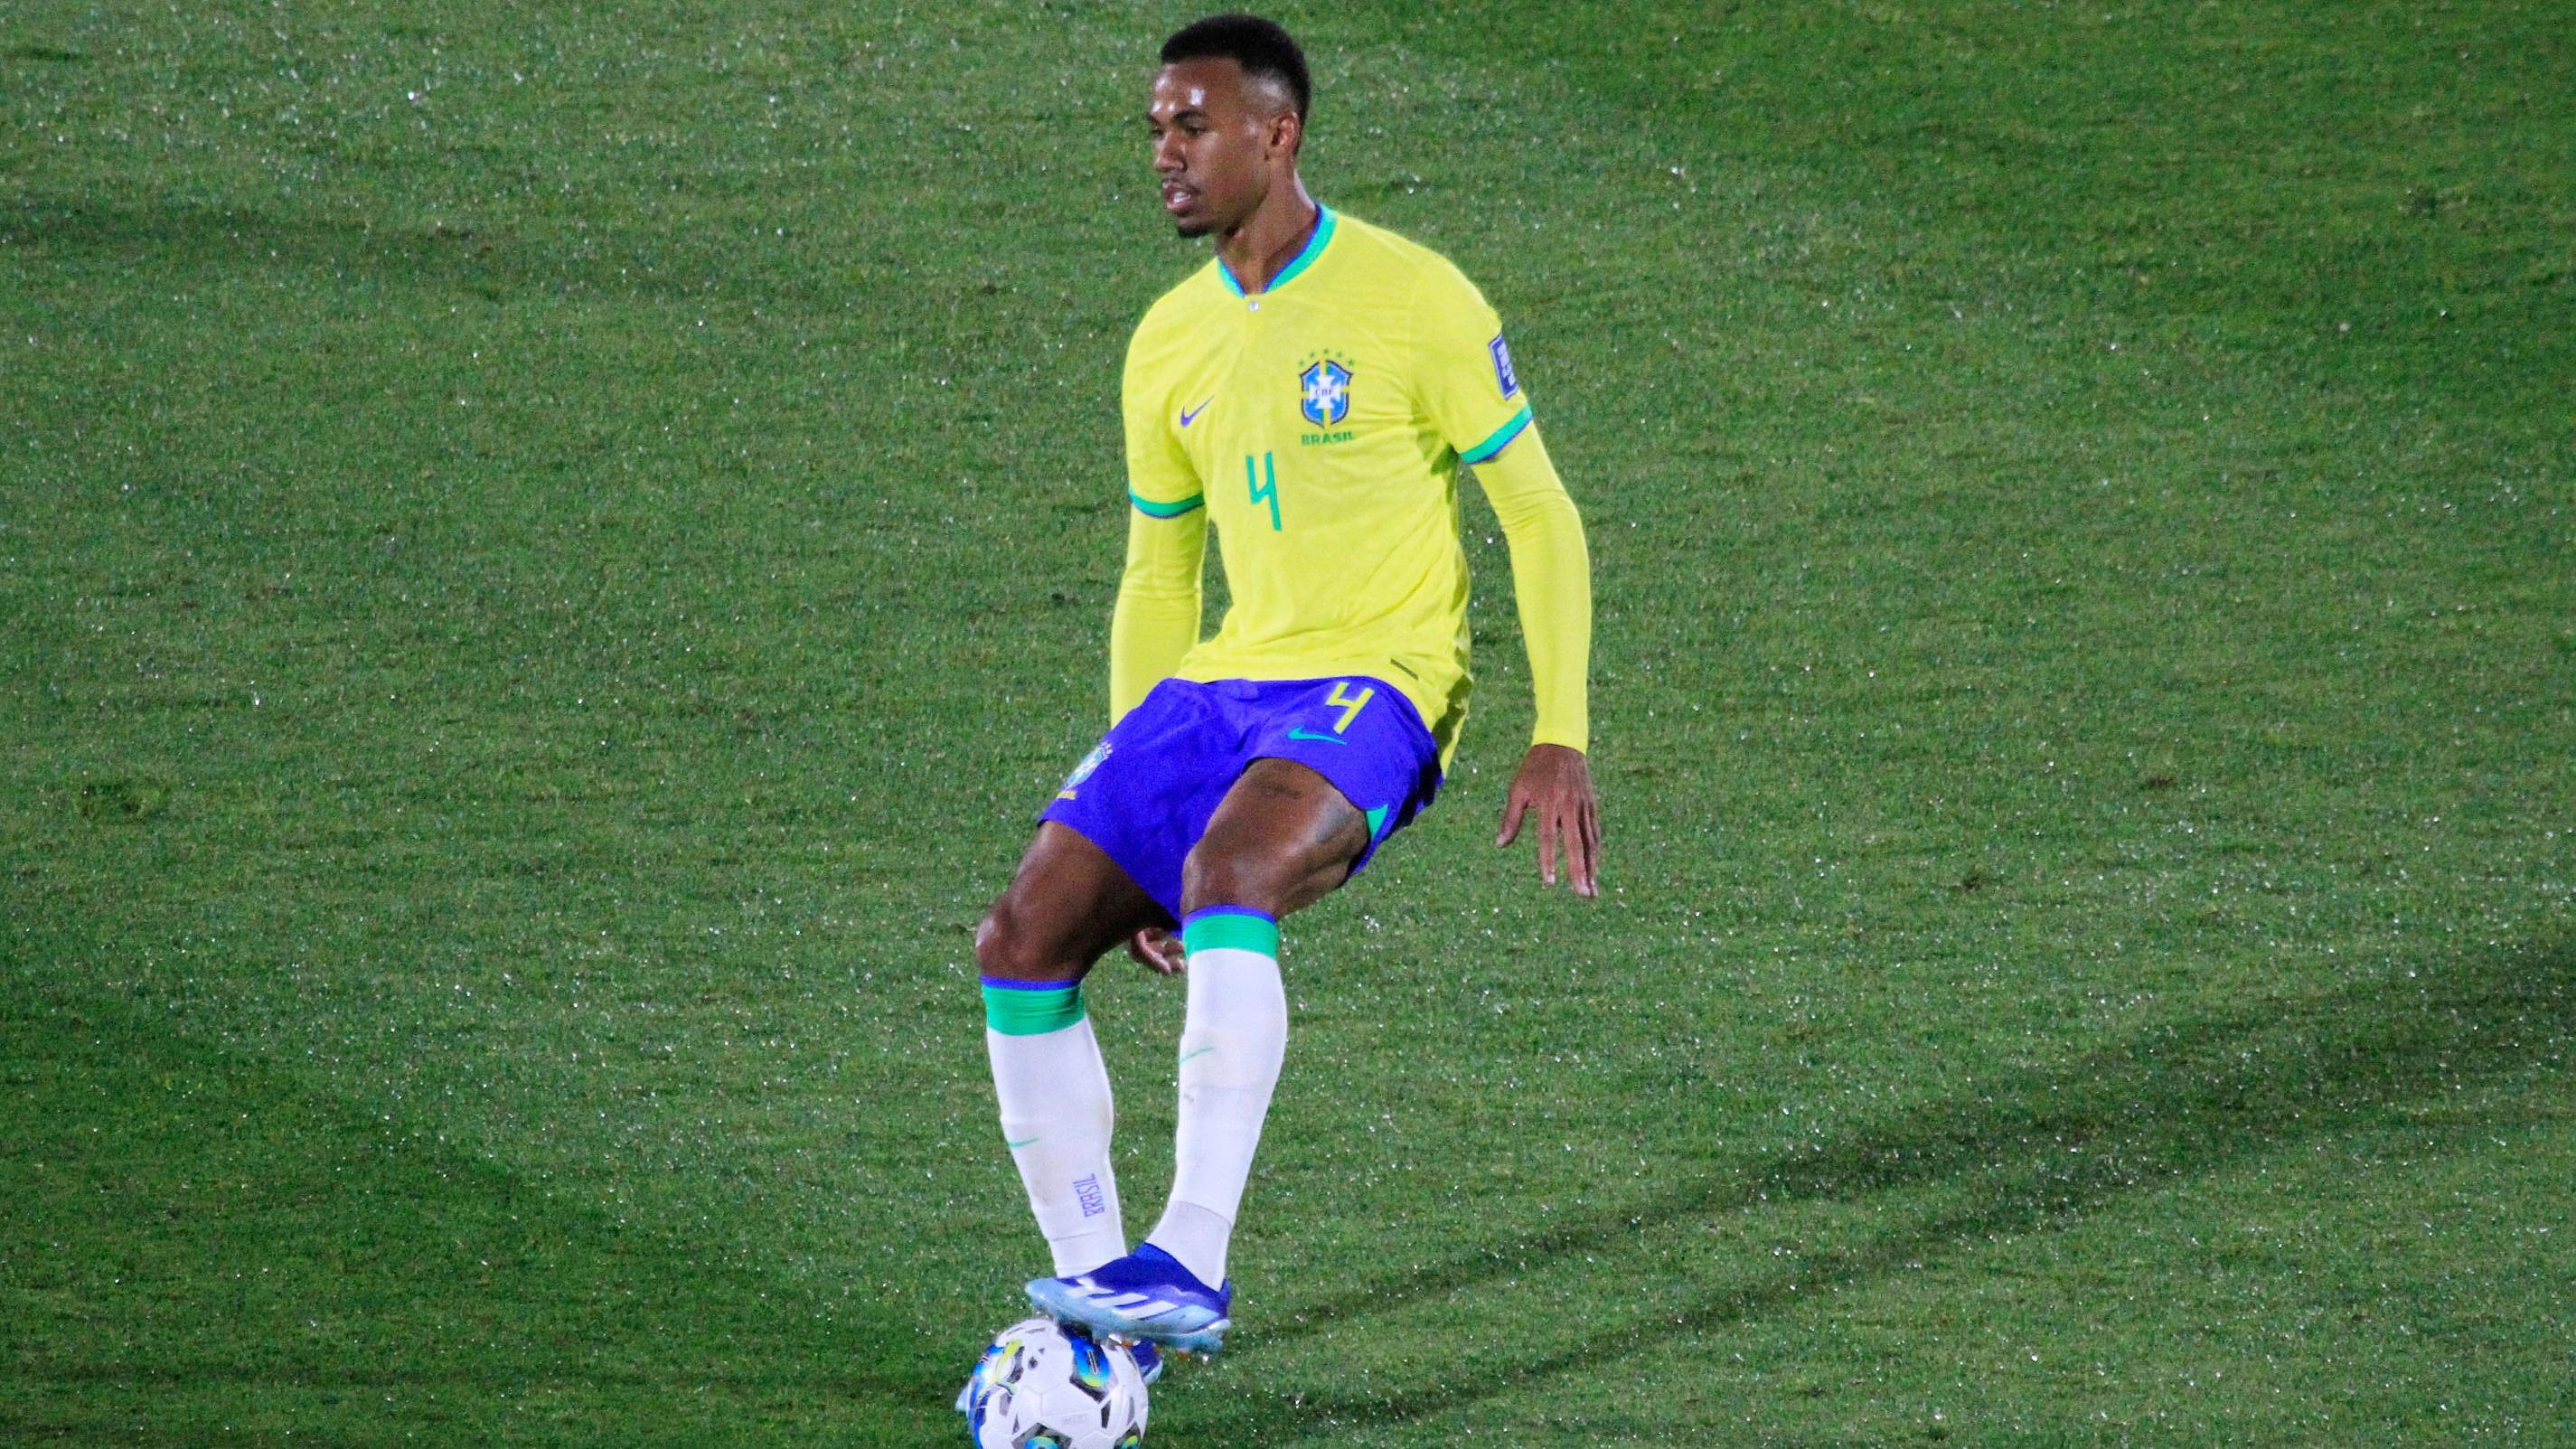 Football: Gabriel leaves the Brazilian selection due to injury, Bremer replaces him